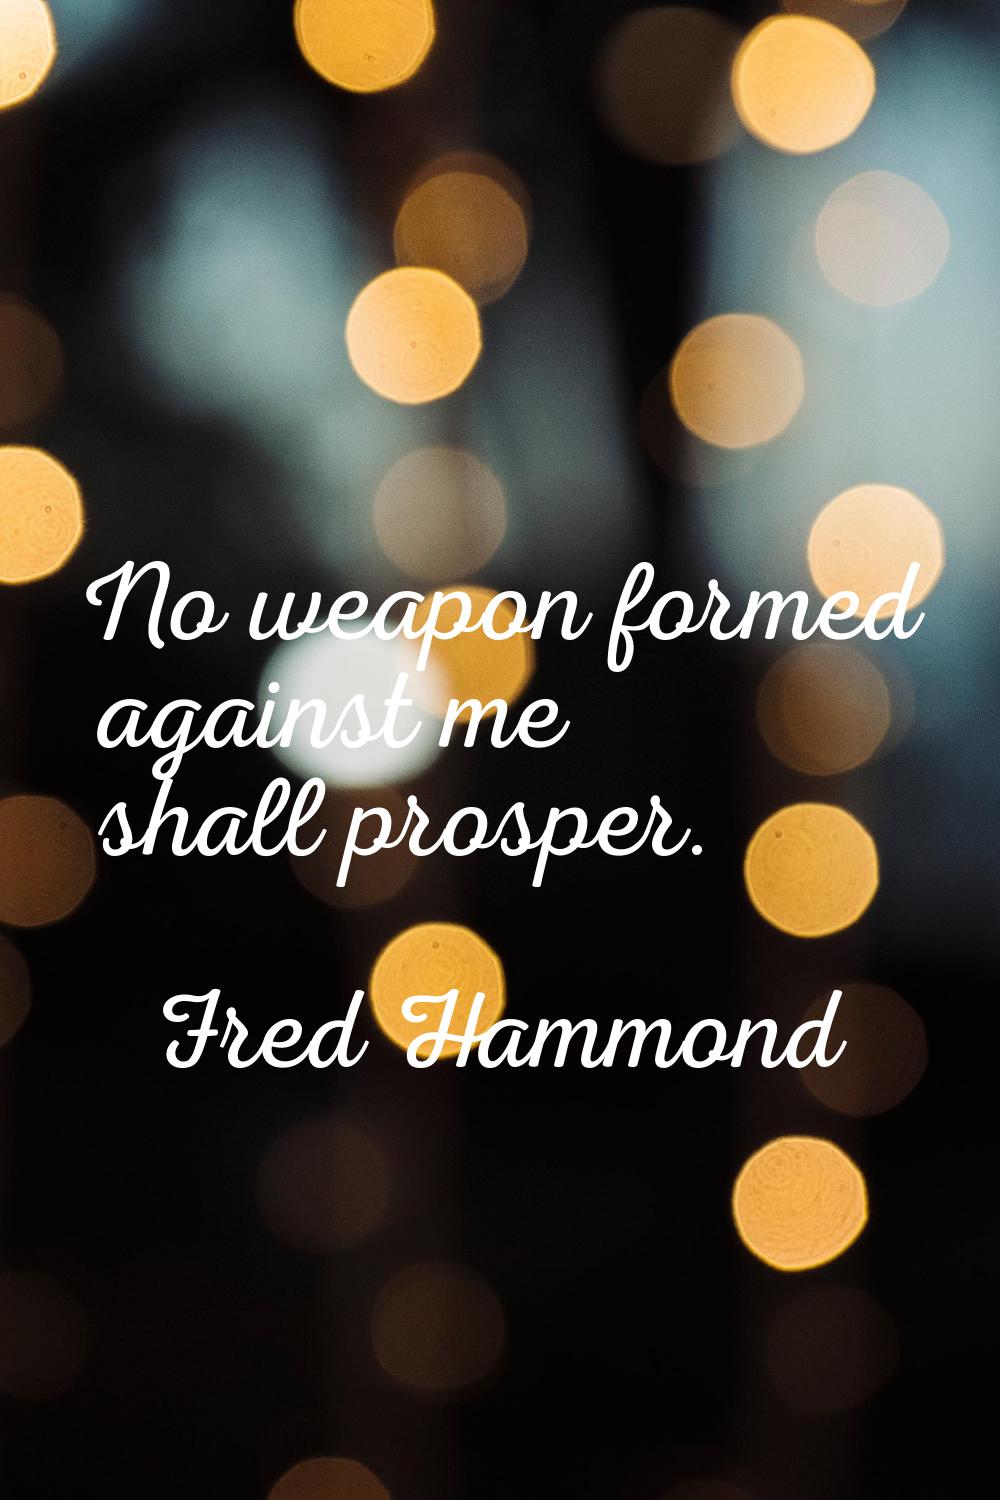 No weapon formed against me shall prosper.